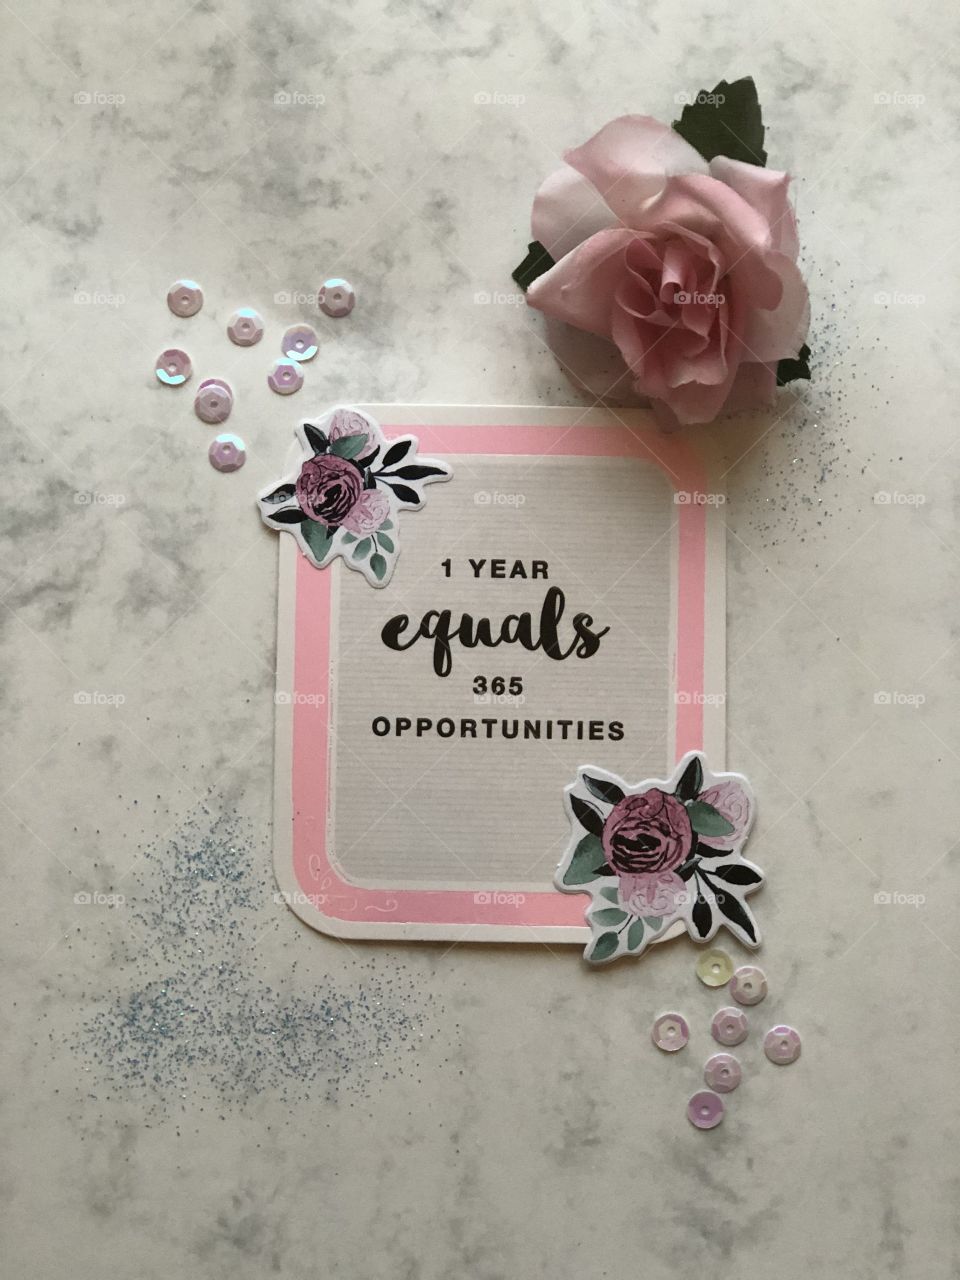 Opportunities, planning, Rose, aphorism, girly, 